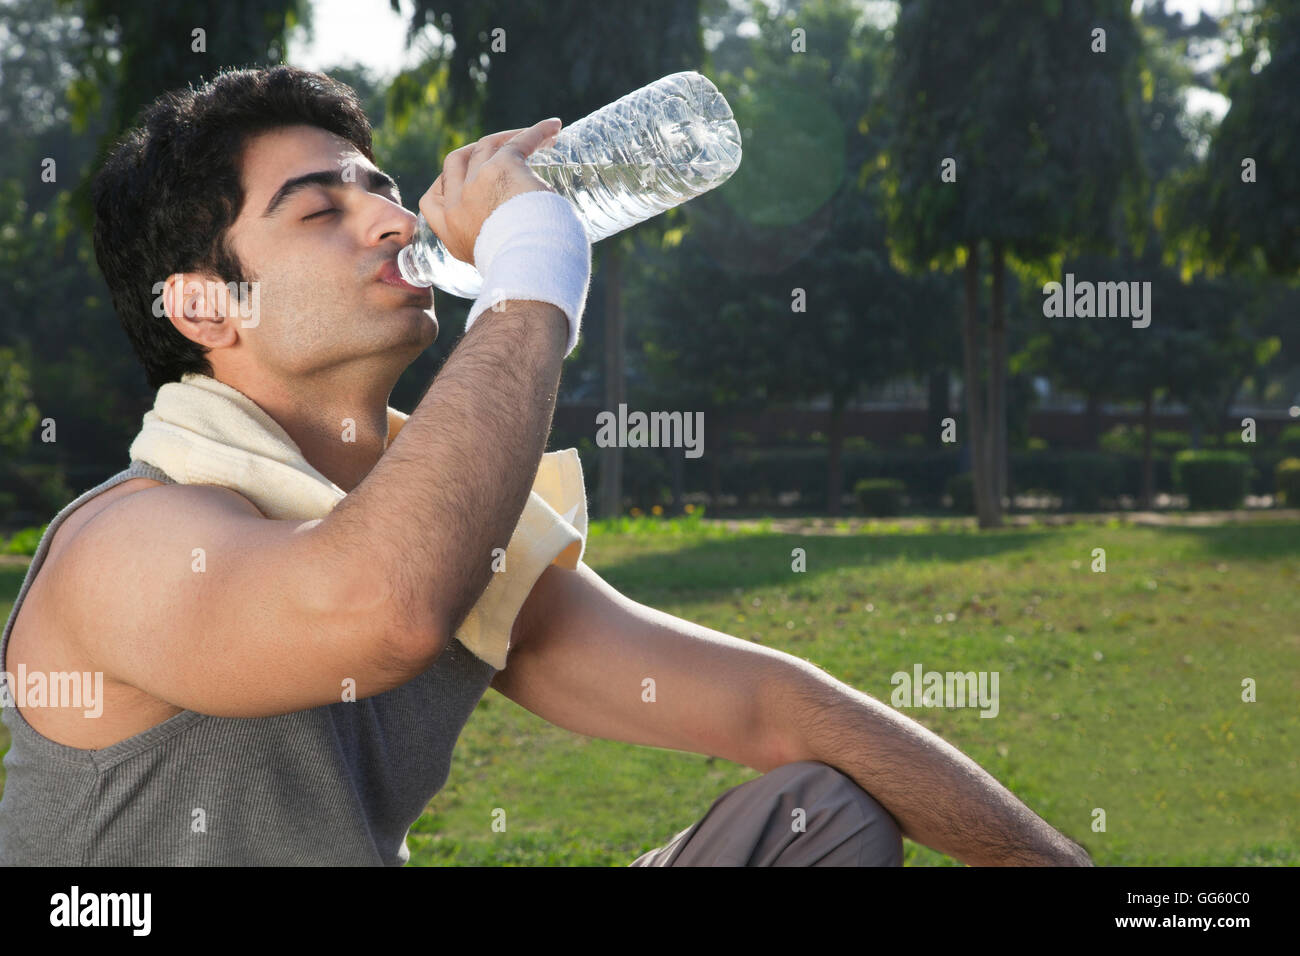 Young fit man drinking water after sport workout Stock Photo